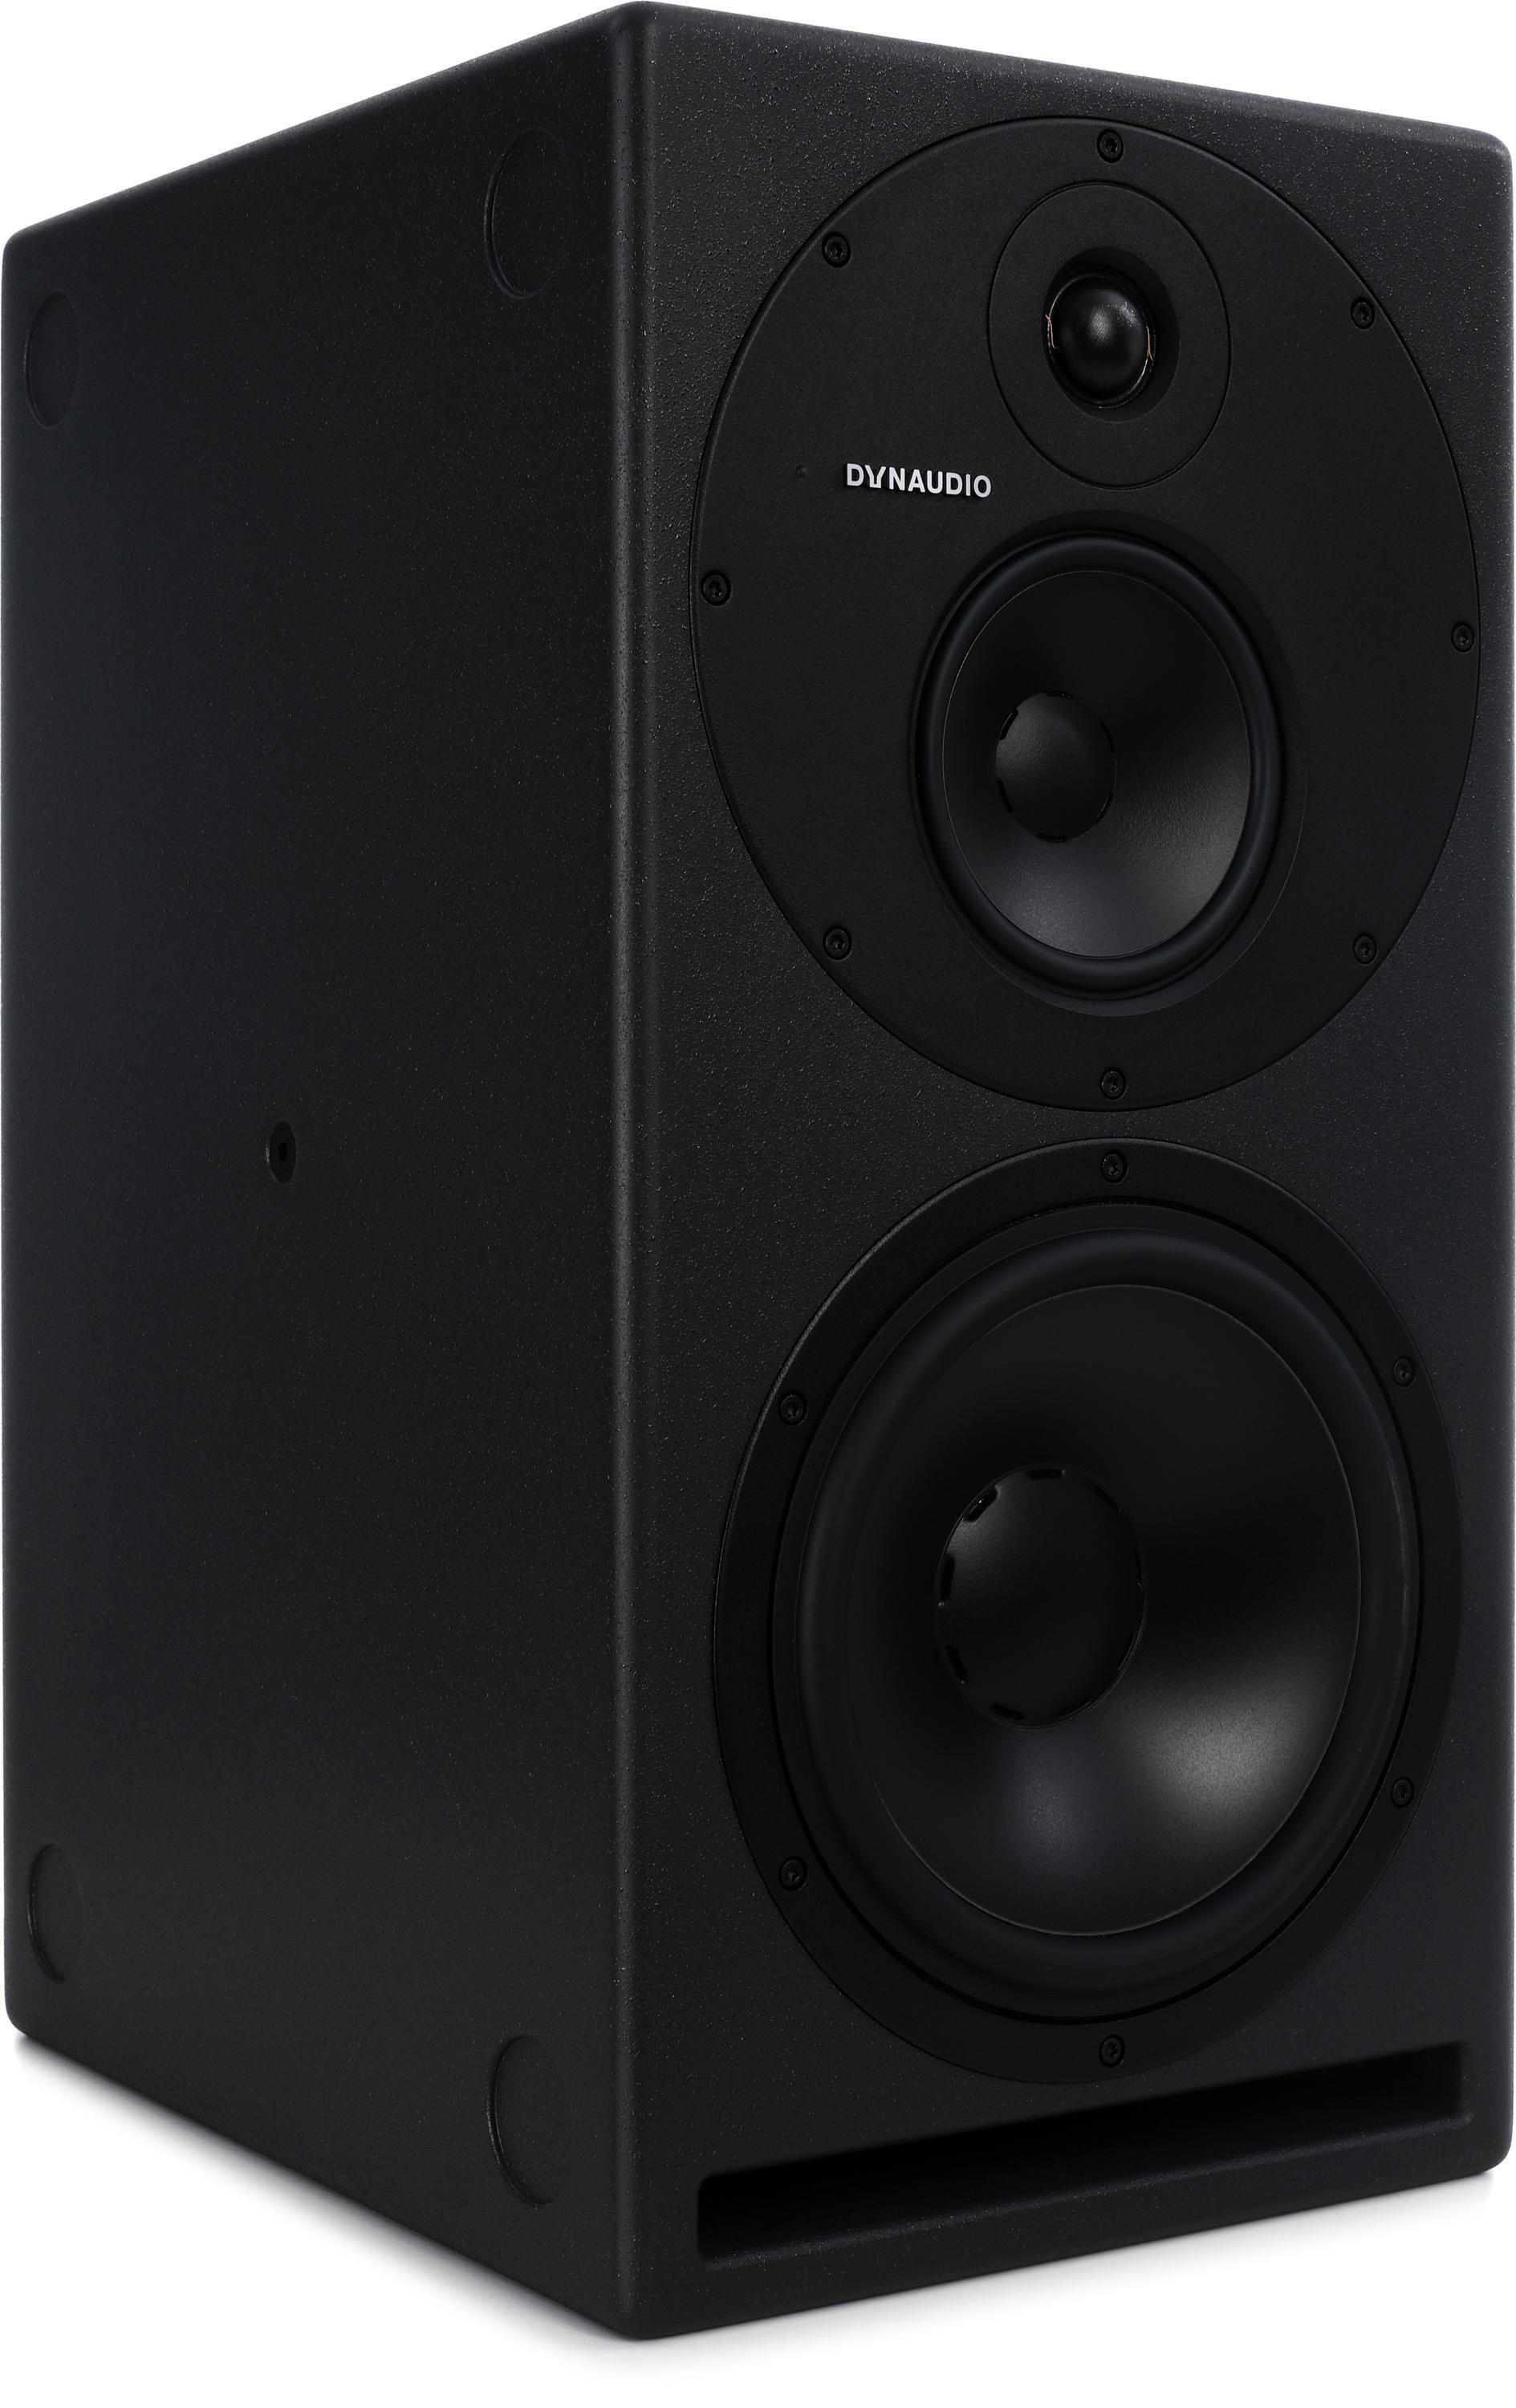 Sub Series - Powerful Sub Series for every Dynaudio set-up